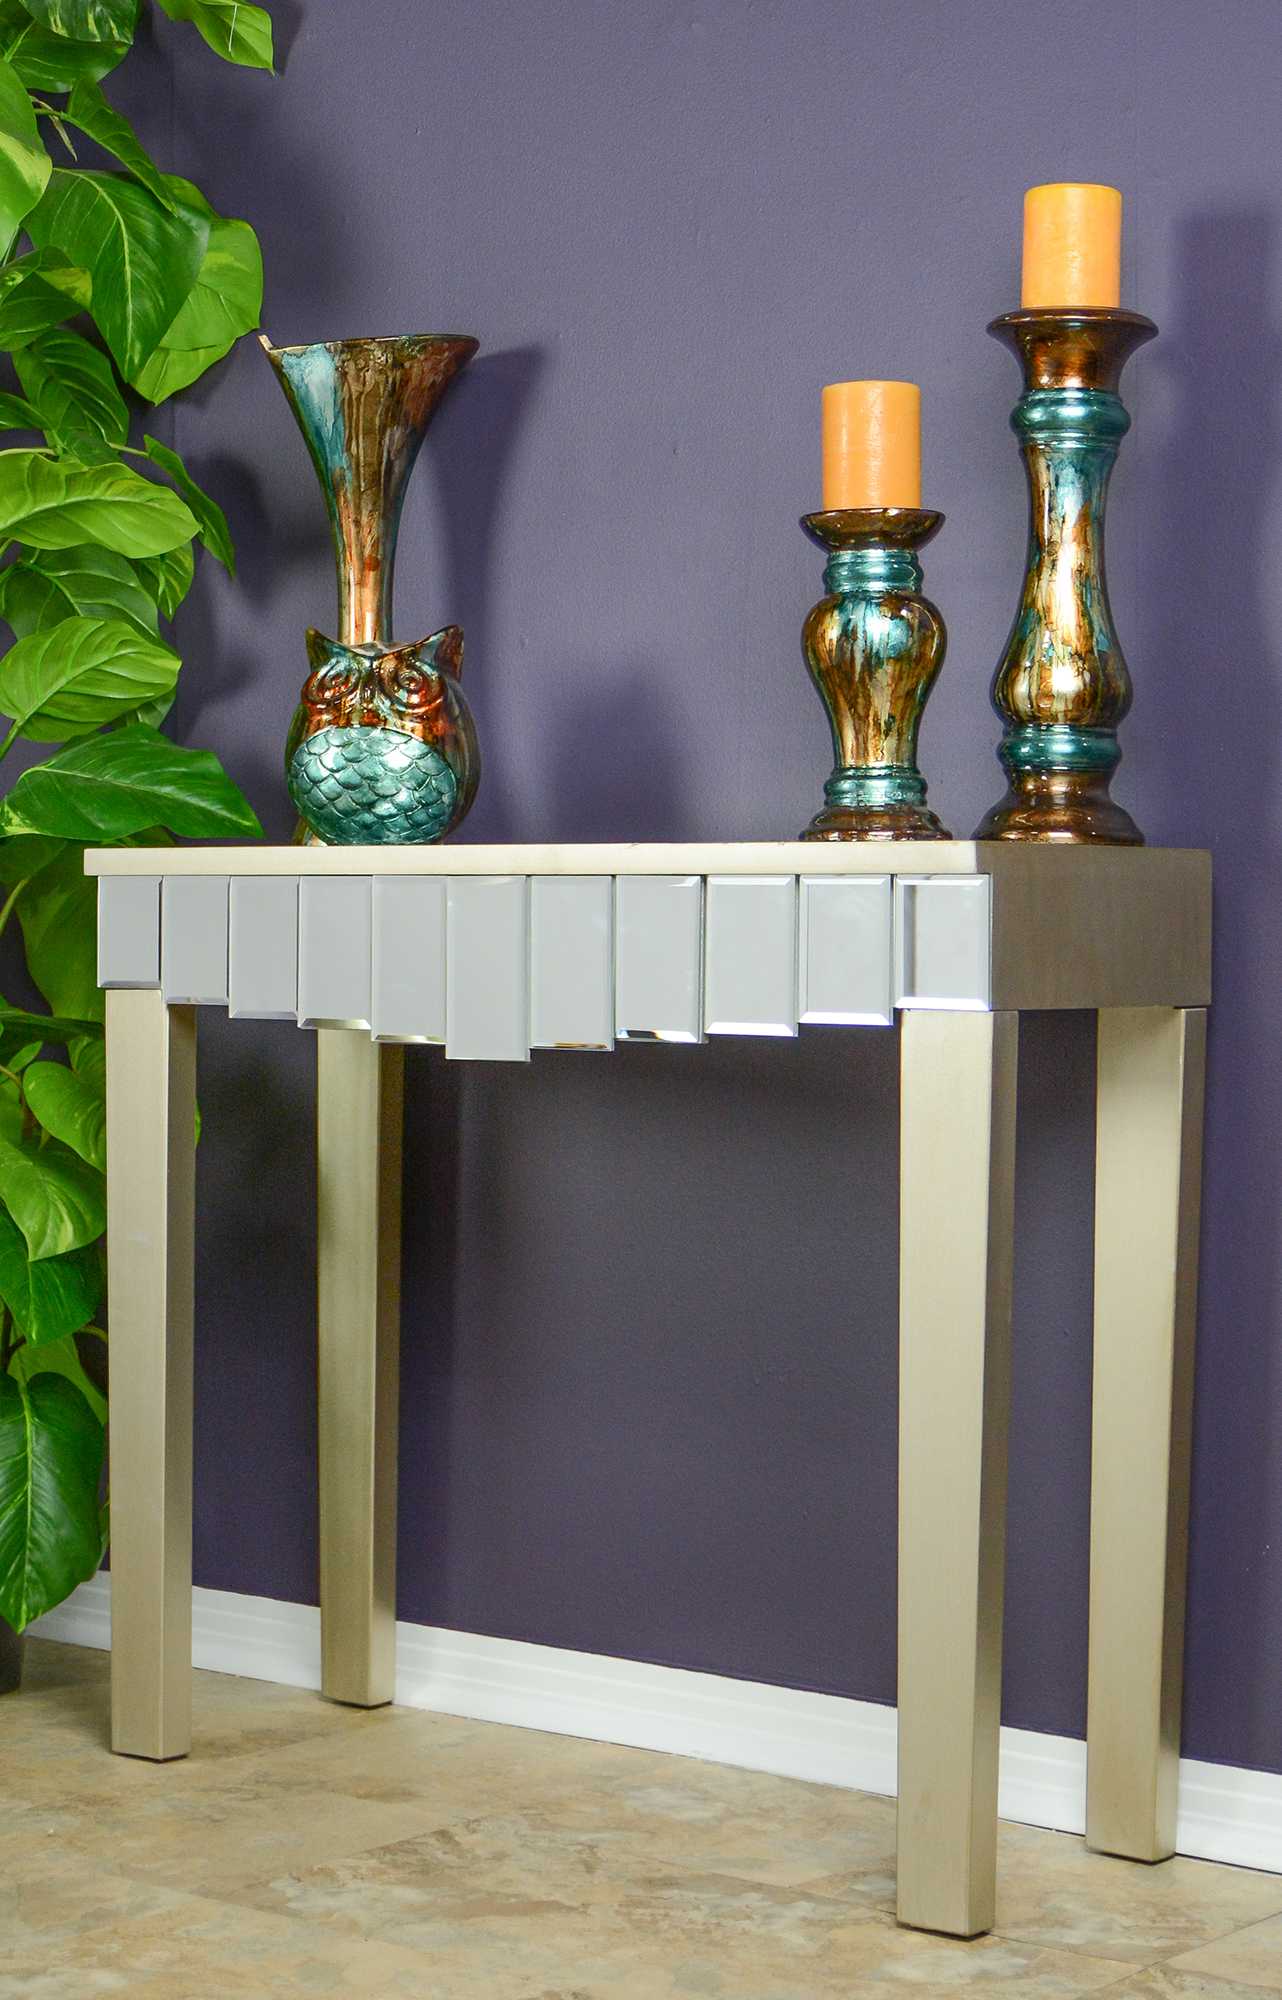 35.5" X 13" X 31" Champagne MDF Wood Mirrored Glass Console Table with Mirrored Glass Inserts and a Drawer